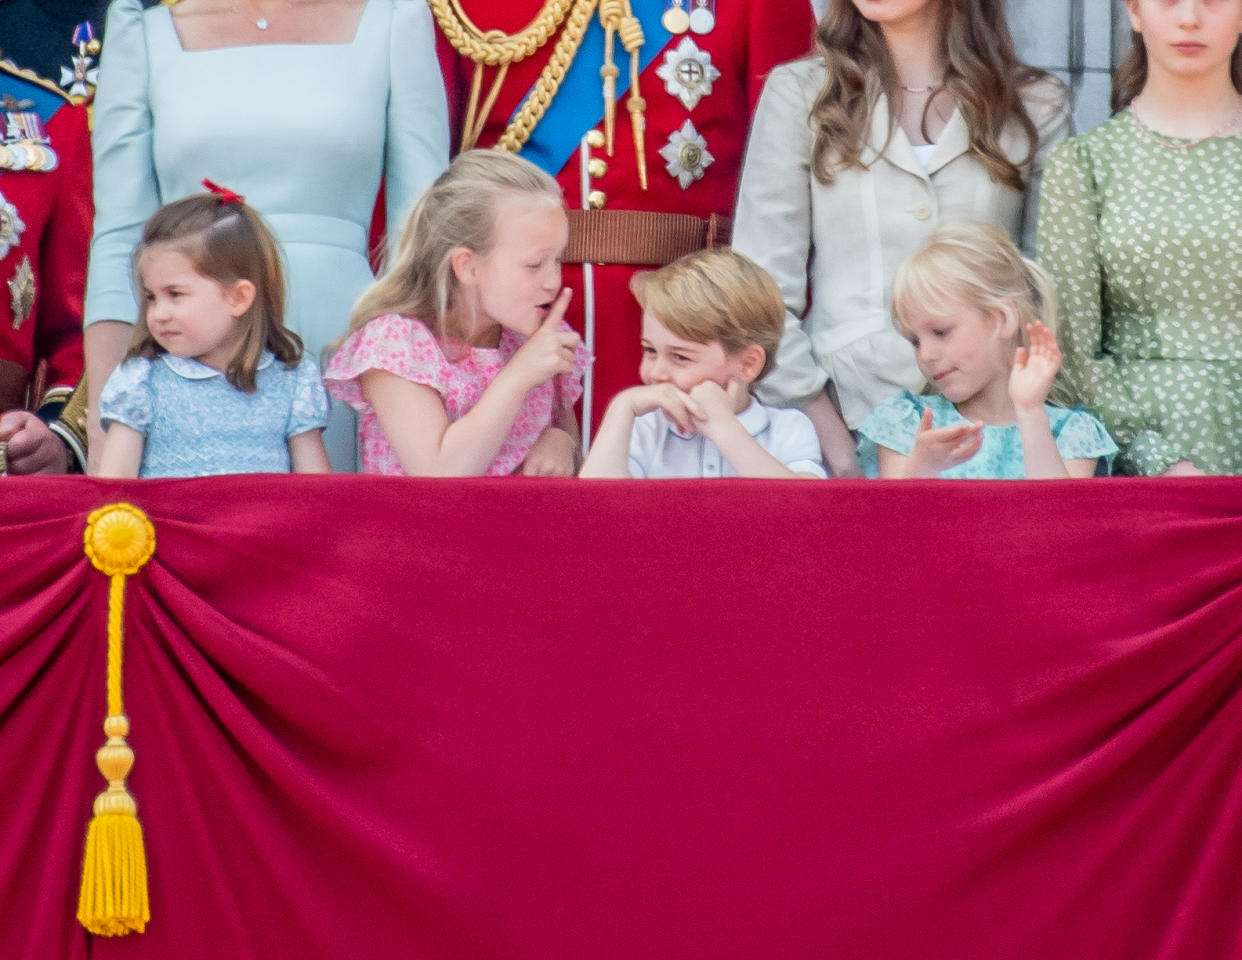 Princess Charlotte (left), Savannah Phillips (middle) and Prince George (right) are in the bridal party (PA)